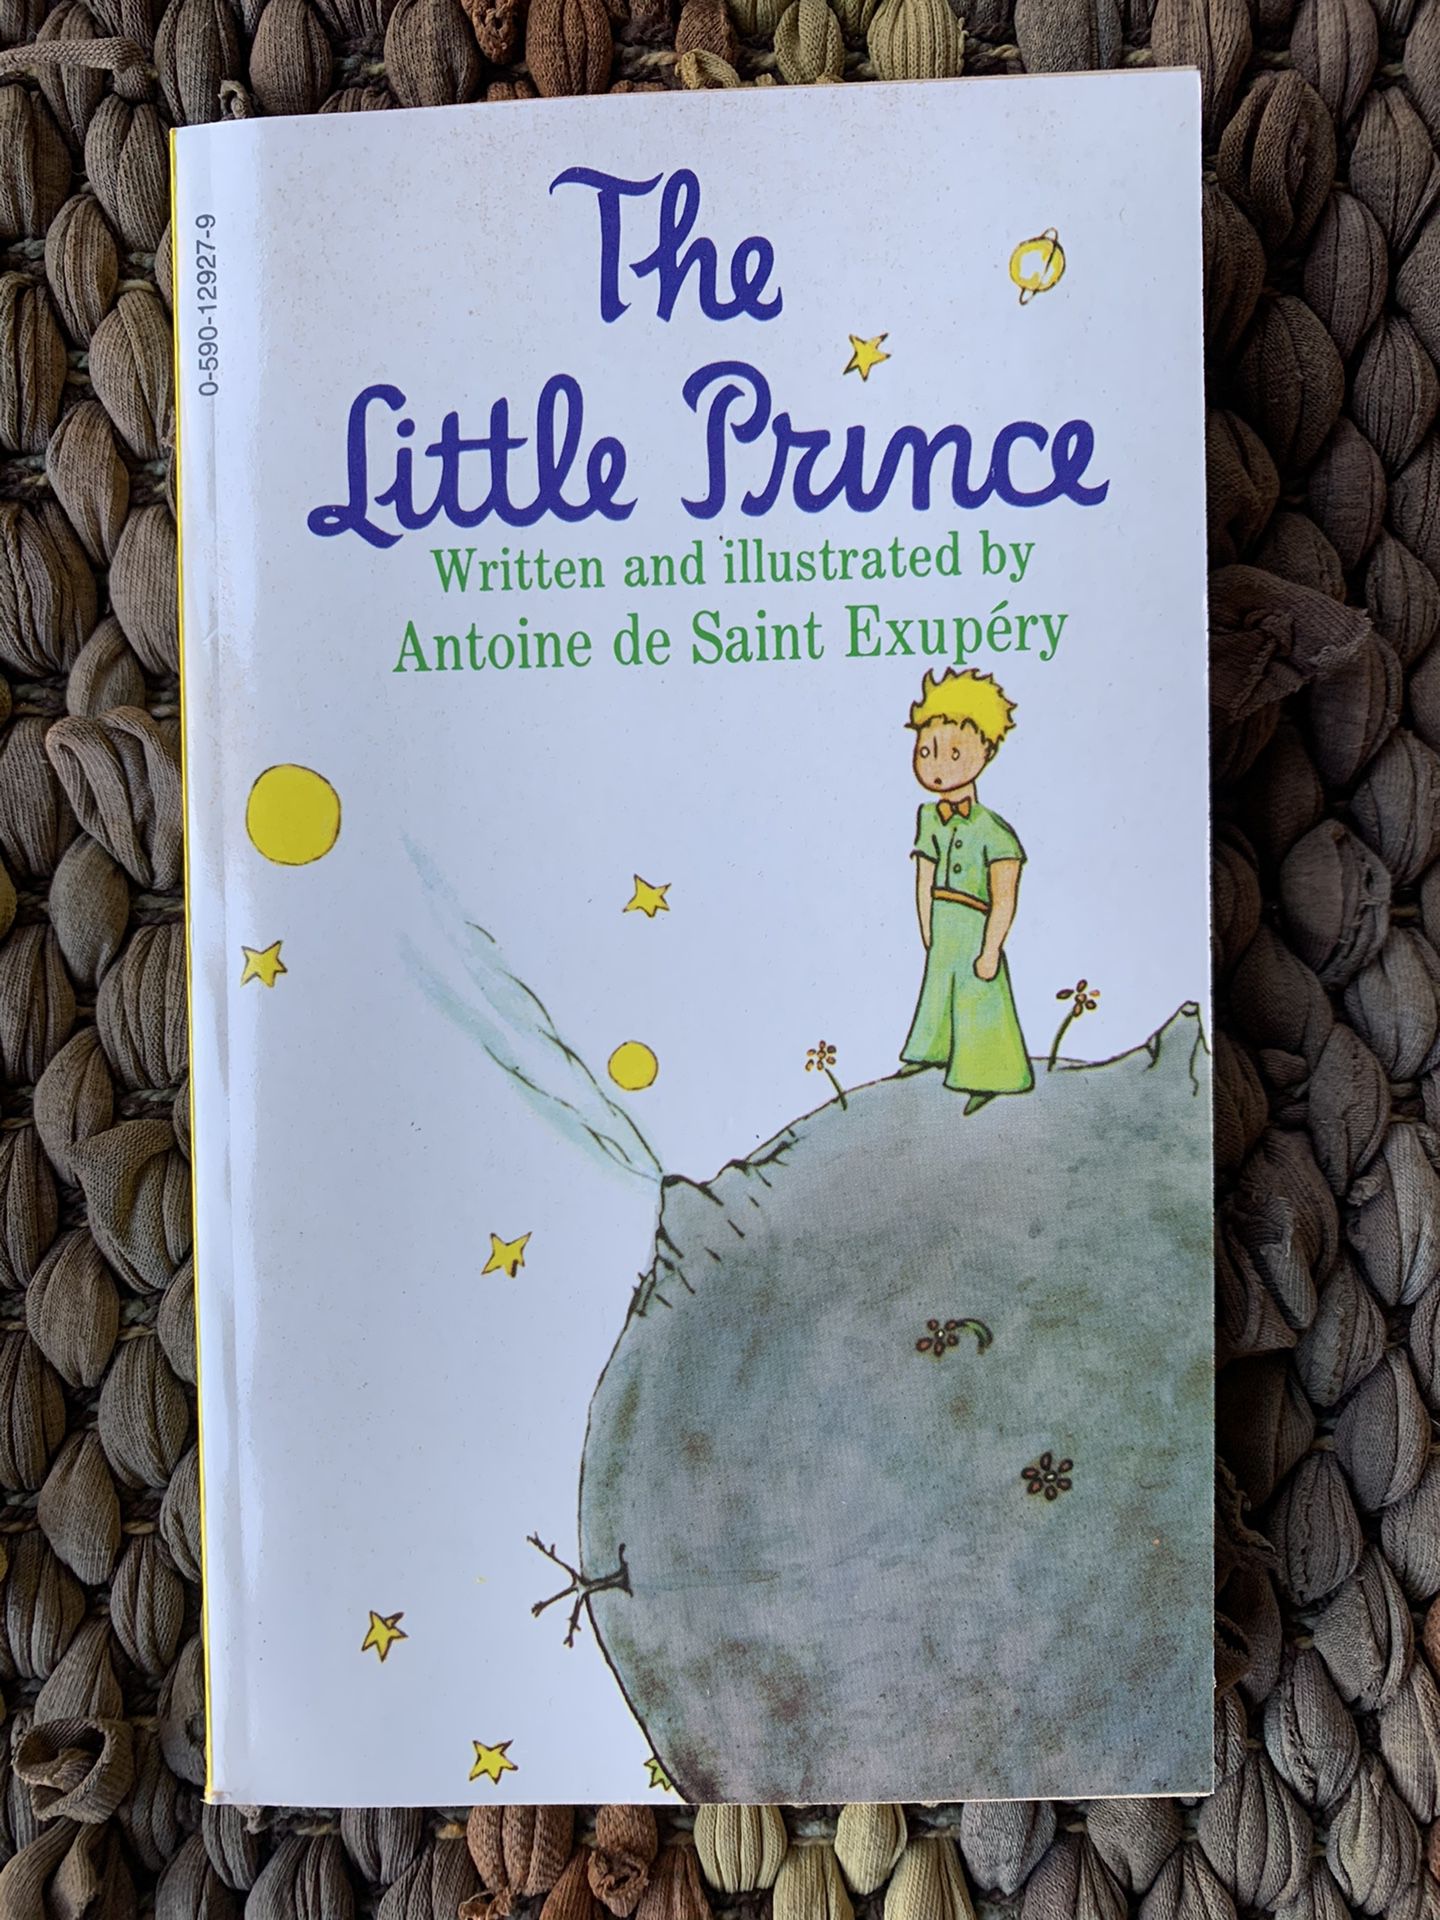 Class set - The Little Prince by Antoine Saint Exupery